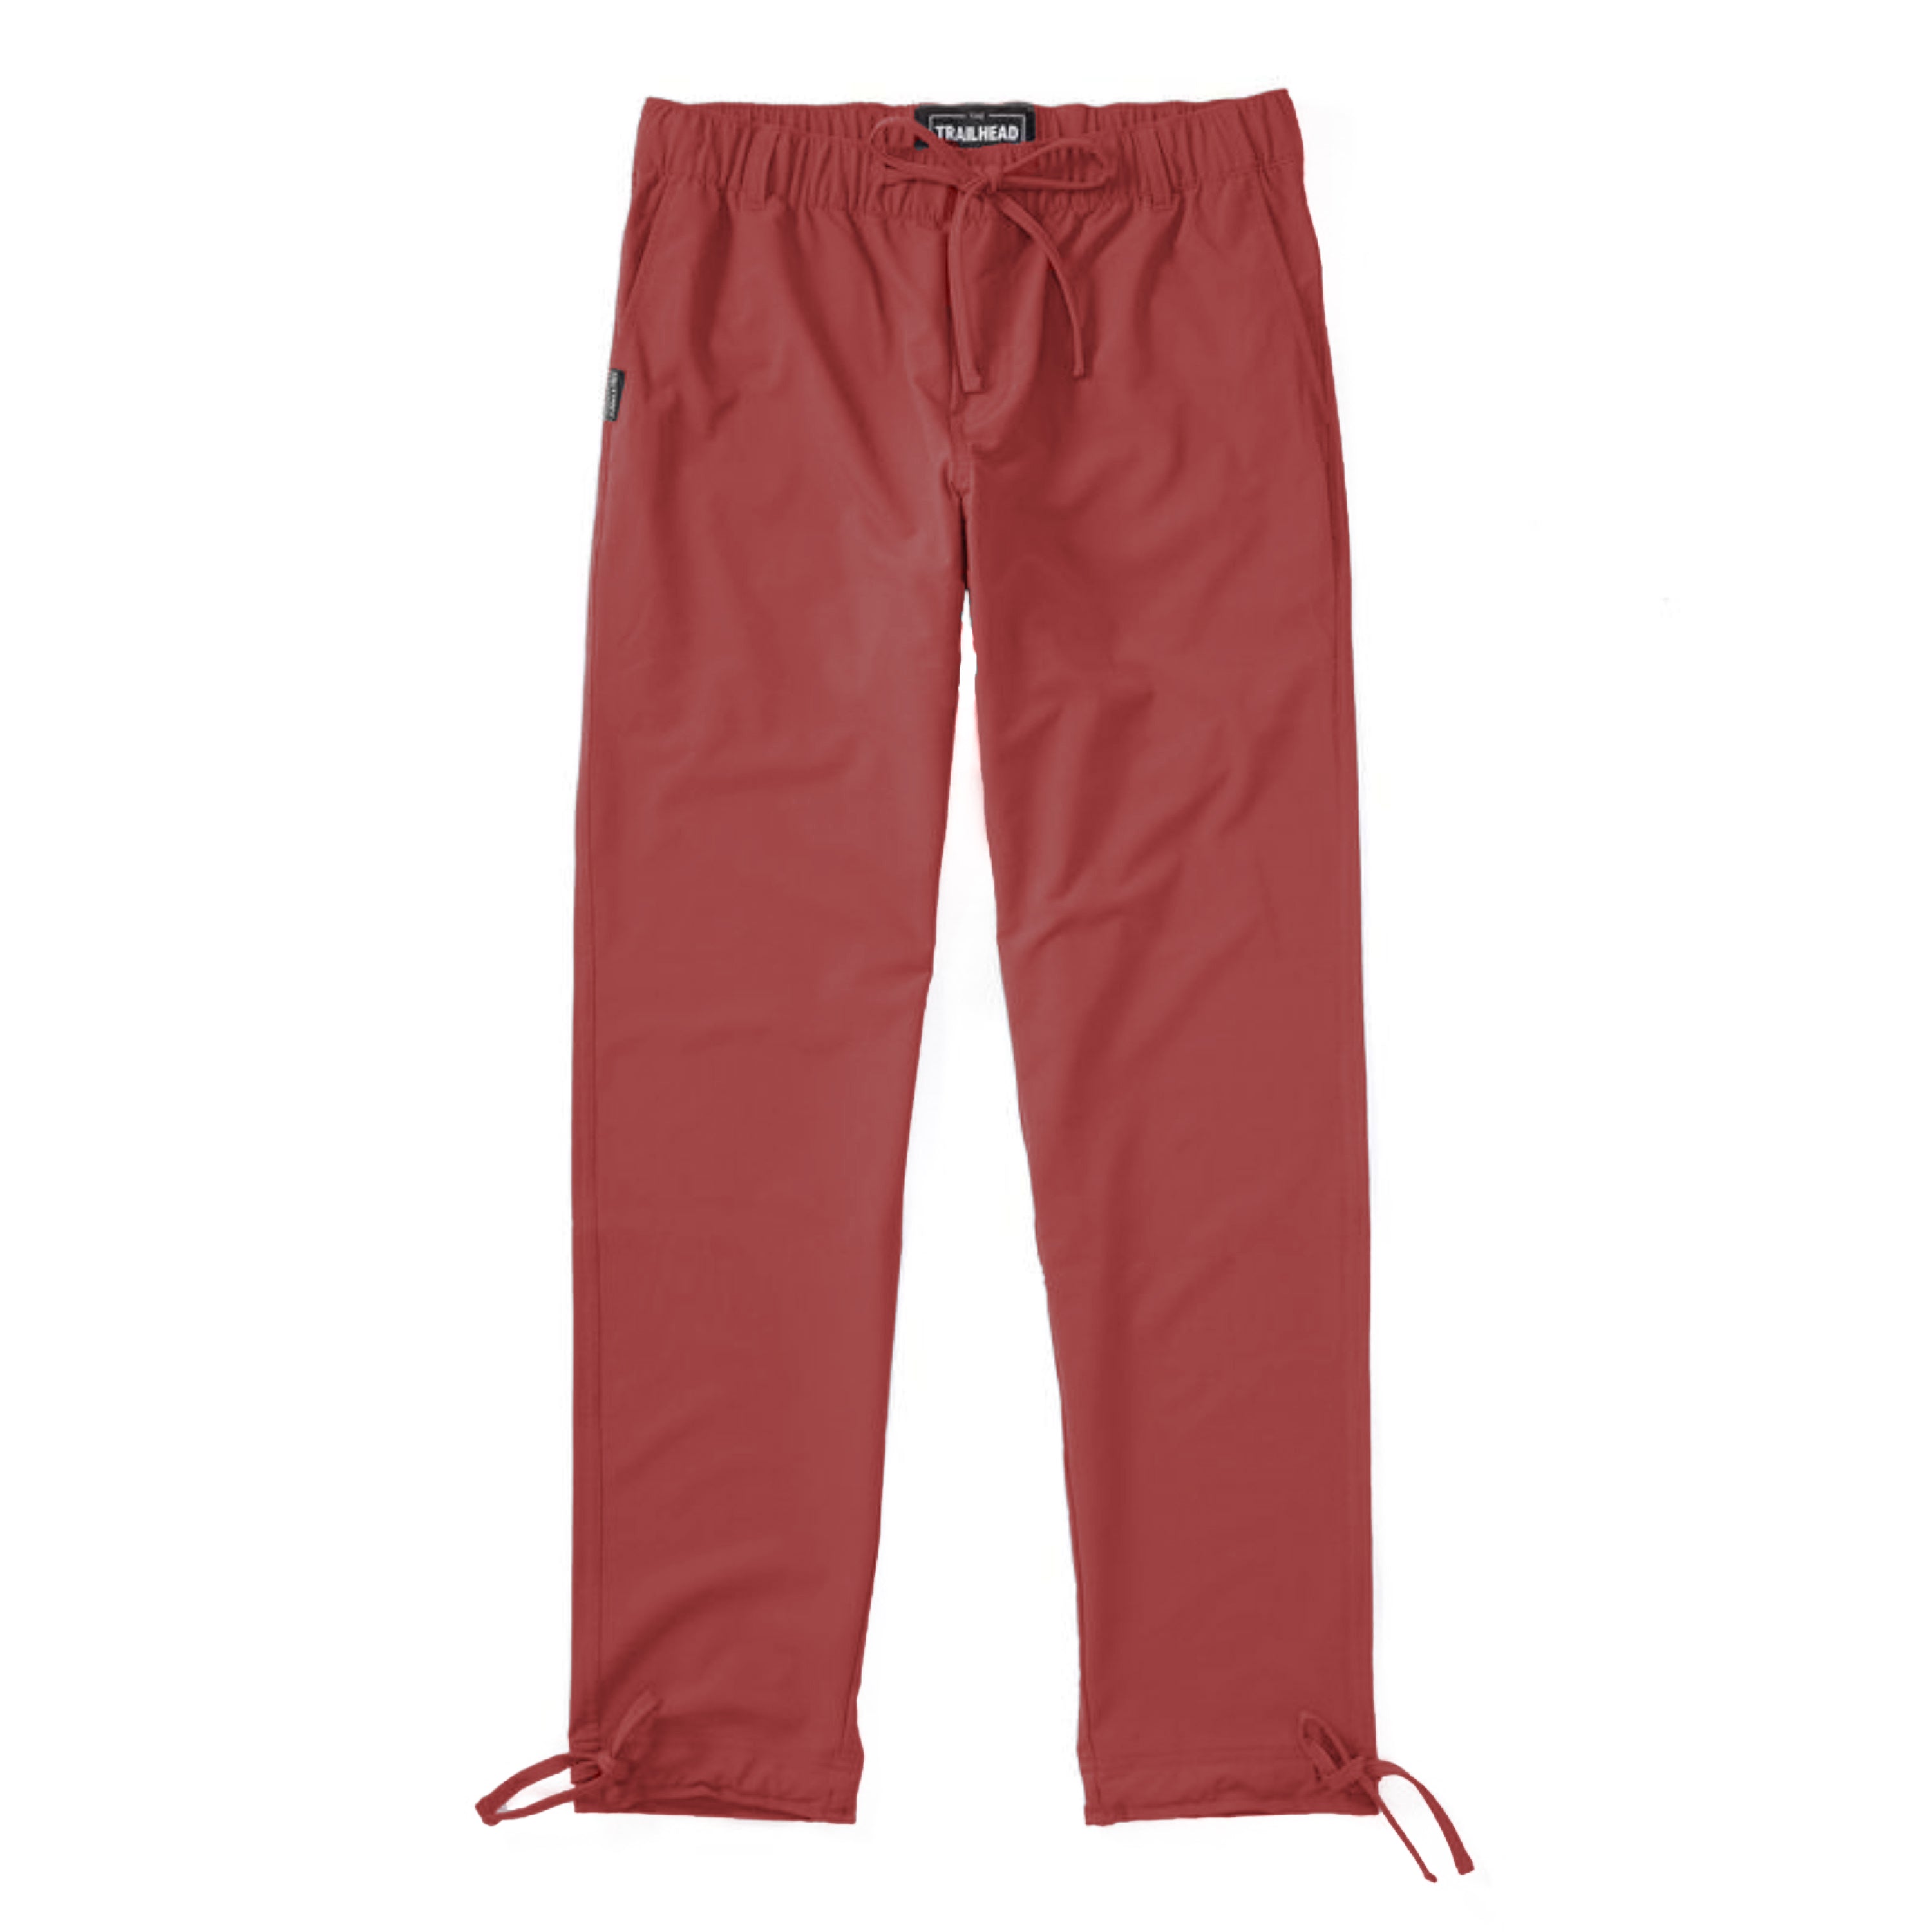 Explore the Outdoors in Comfort with Trailhead Pants | Coalatree